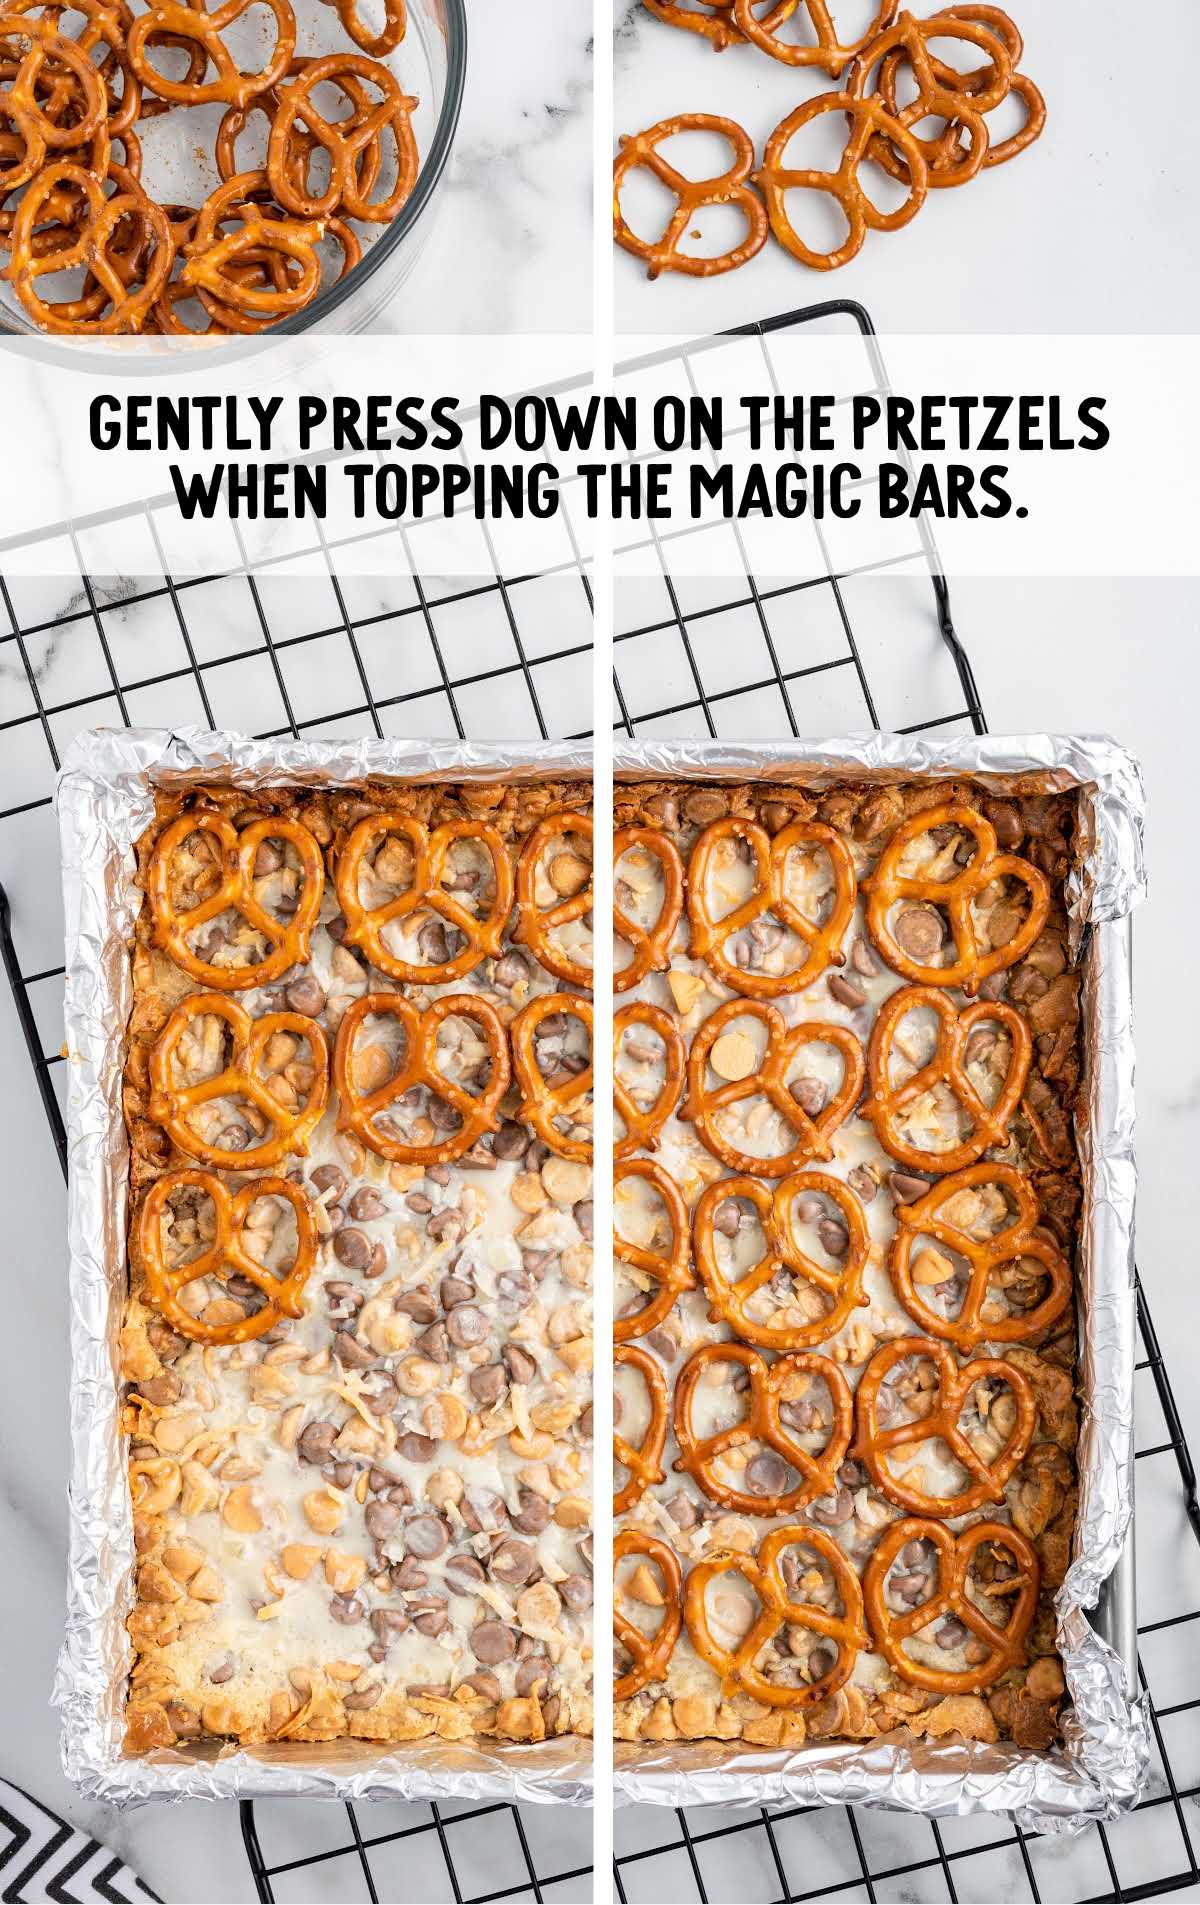 press down on the pretzels when topping the magic bars